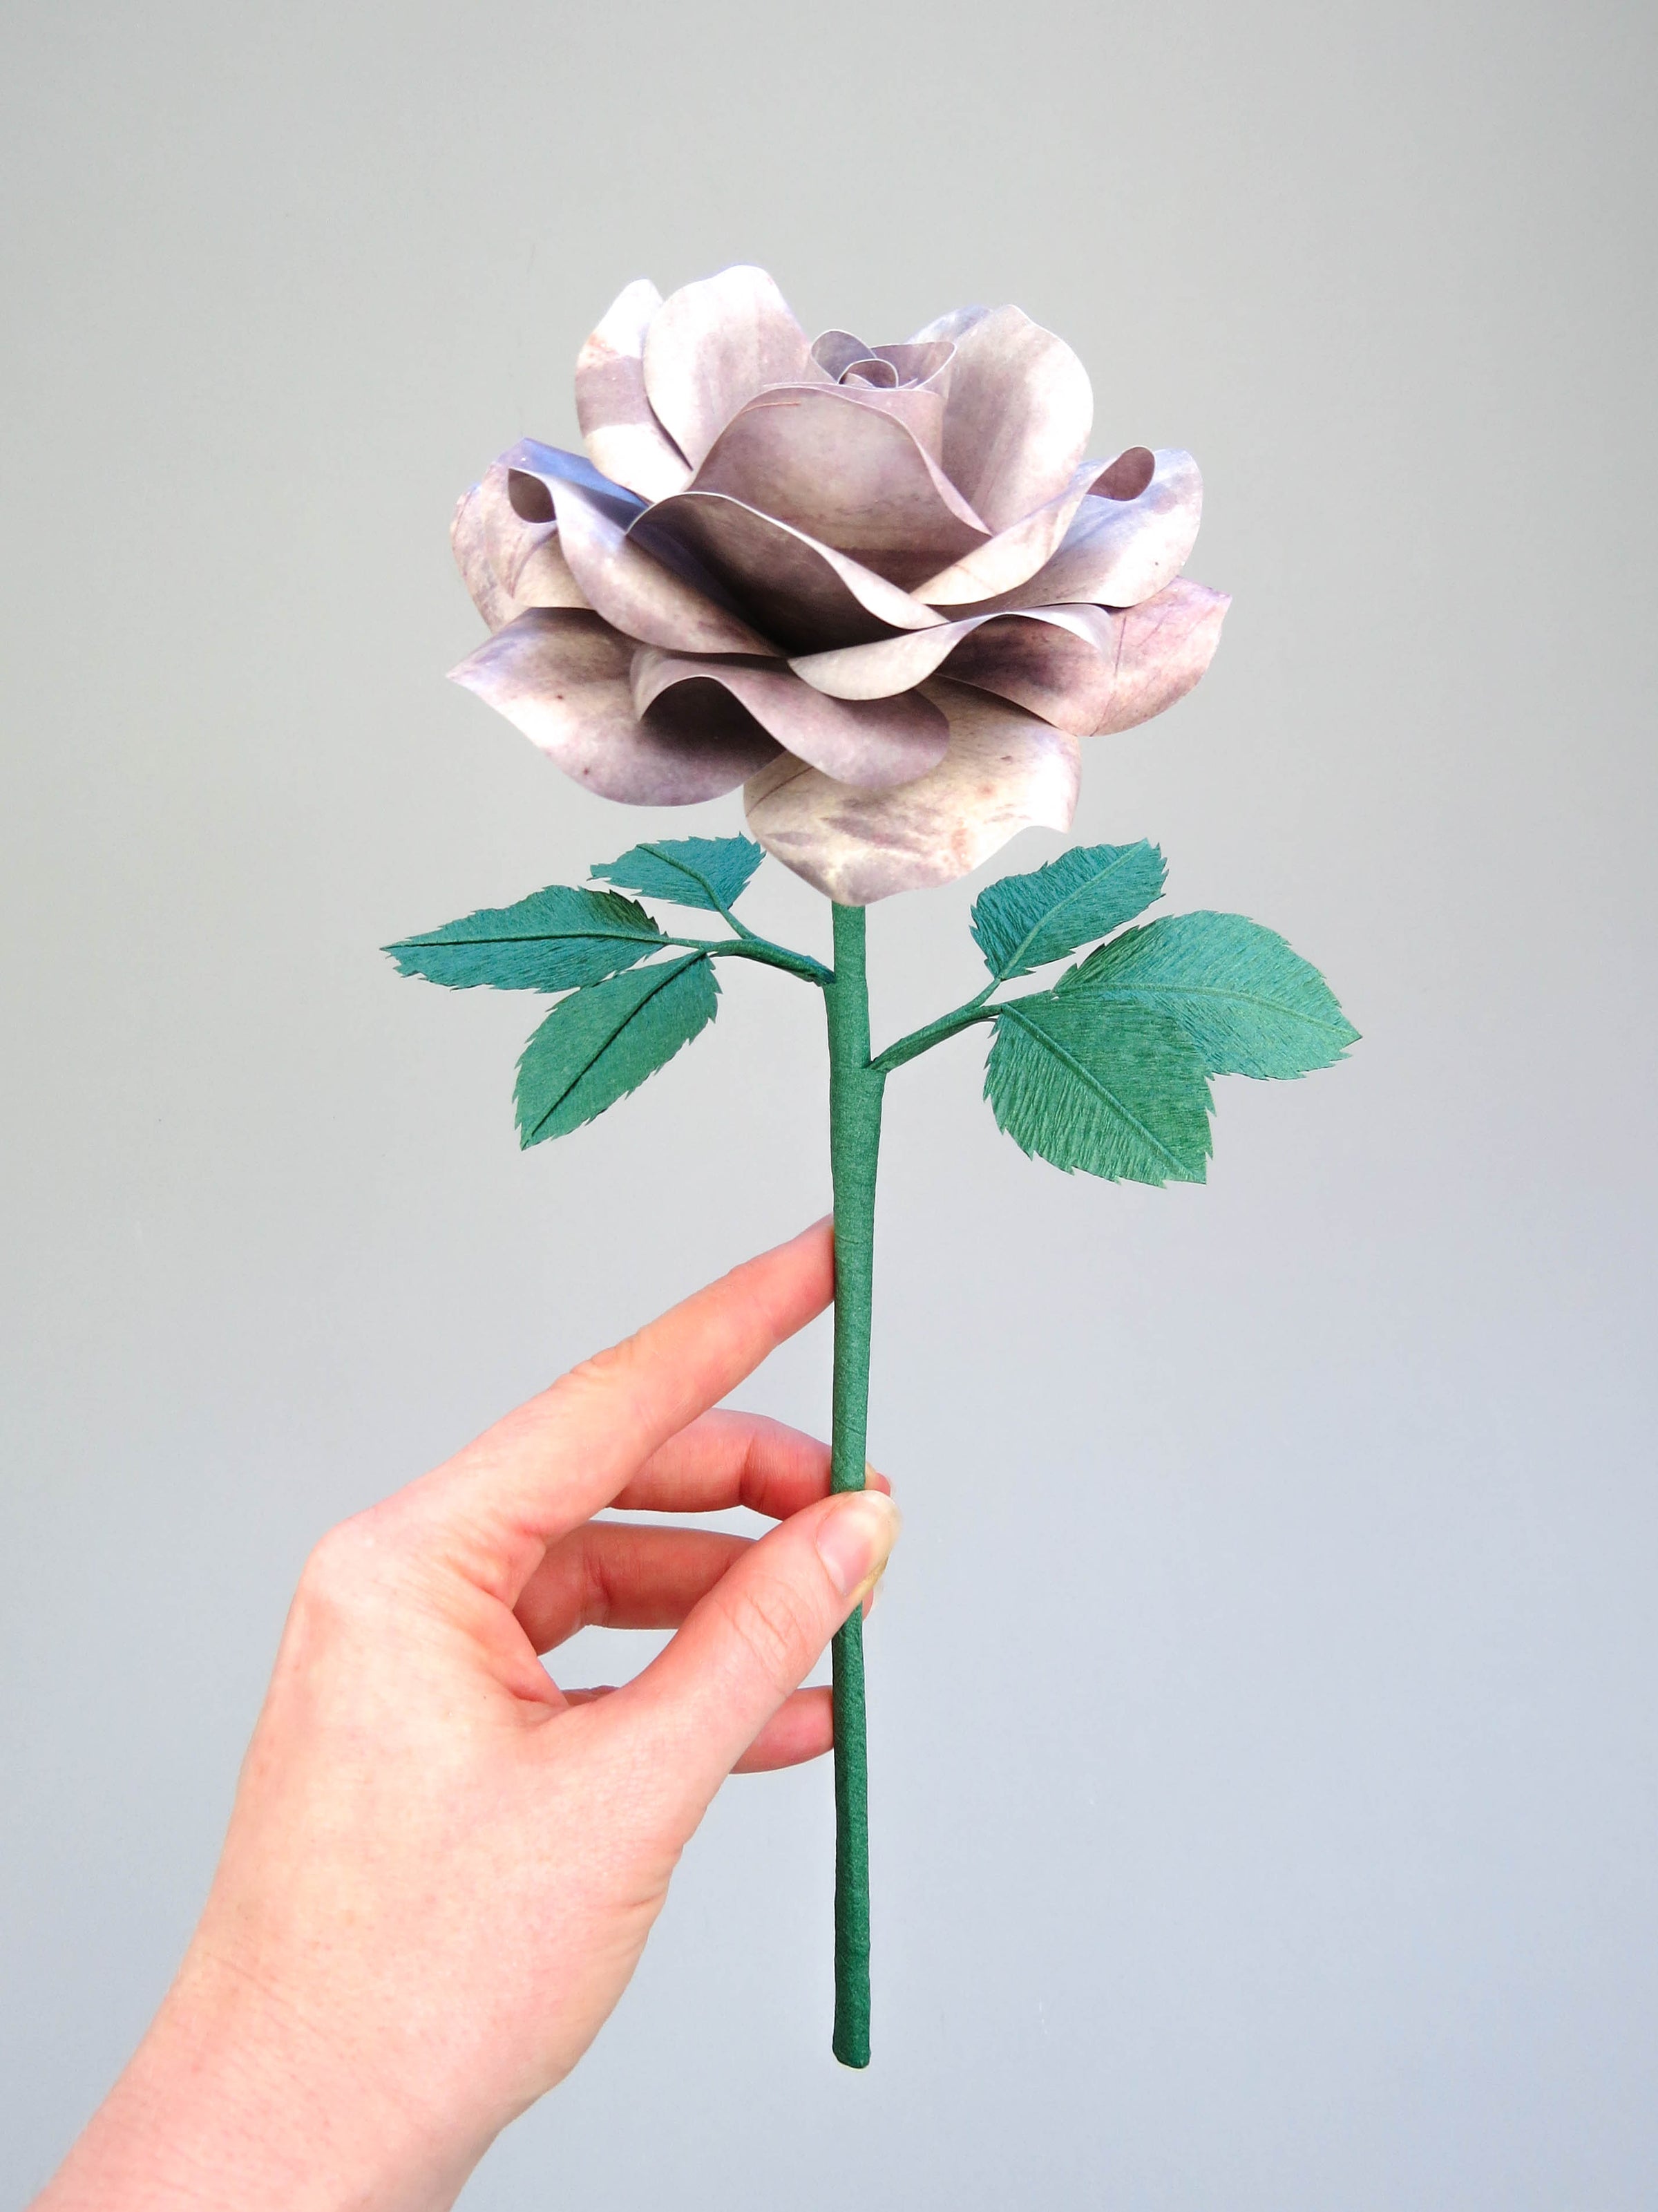 Pale white hand delicately holding the stem of a grey tin paper rose with six forest green leaves